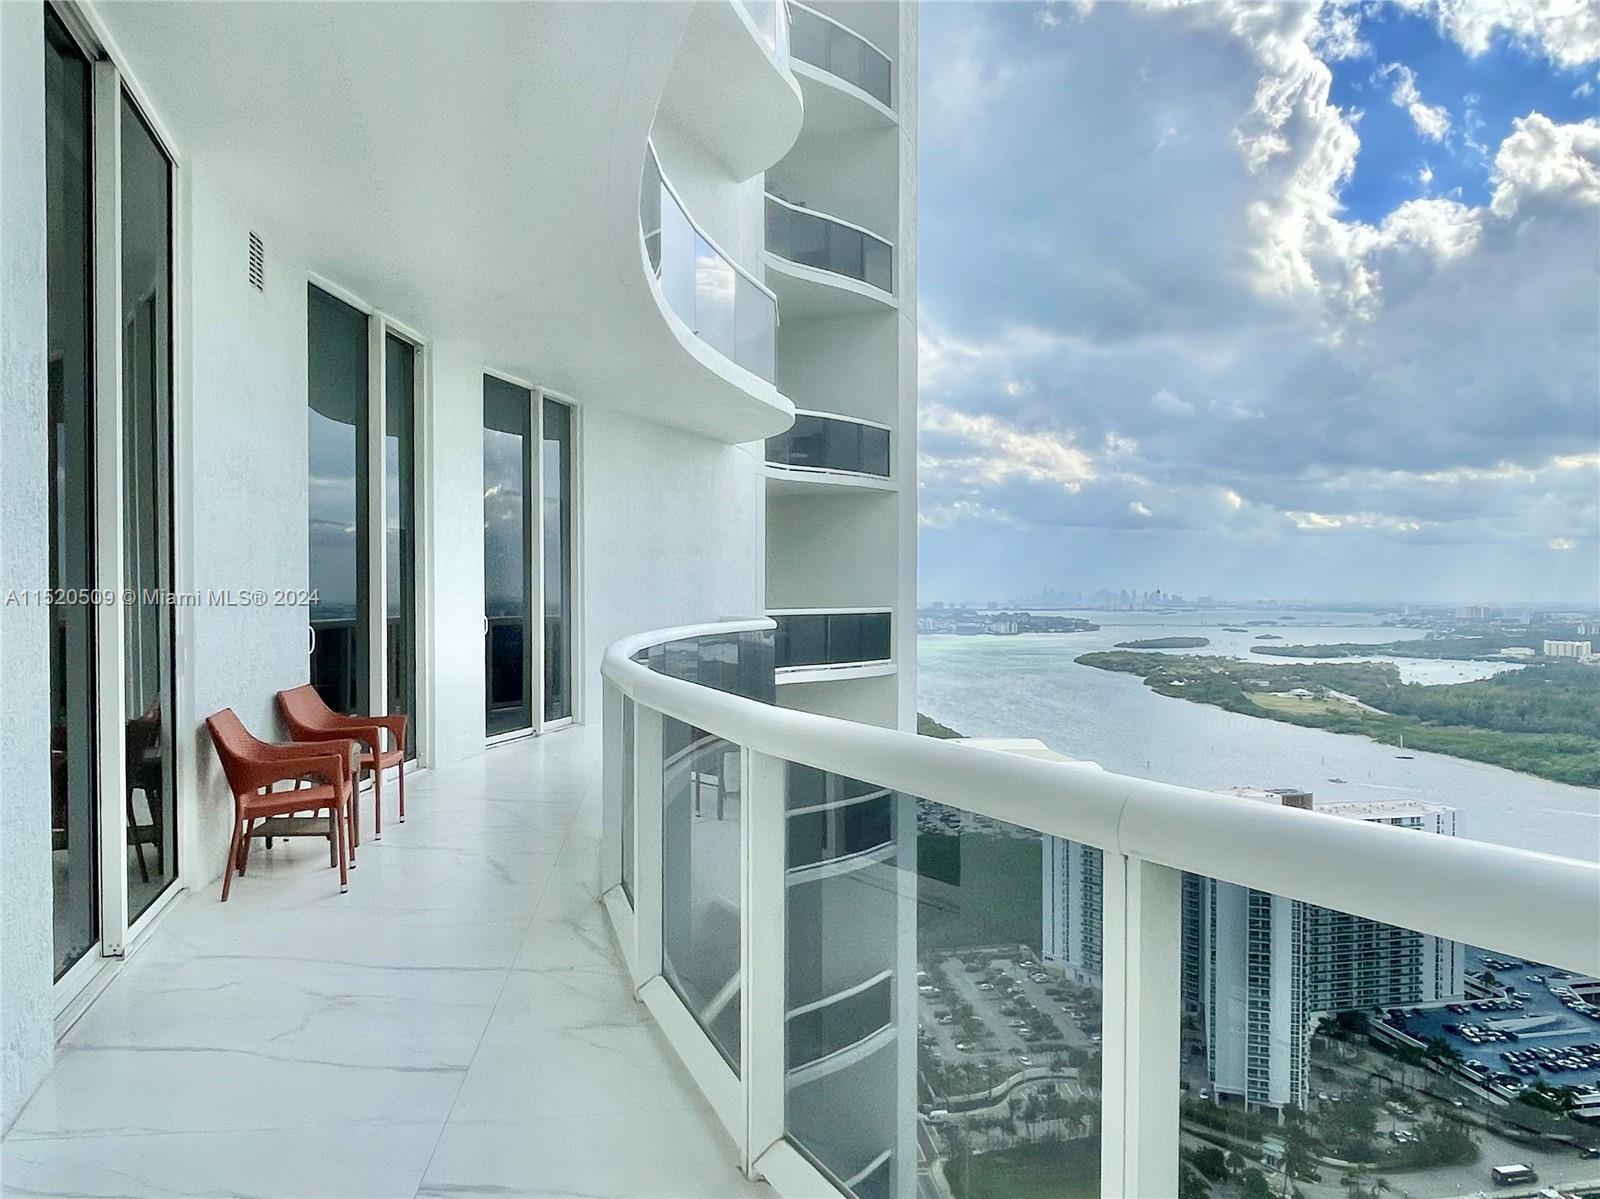 Enjoy breathtaking, unobstructed views of the Intercoastal from this luxurious high-rise located on 